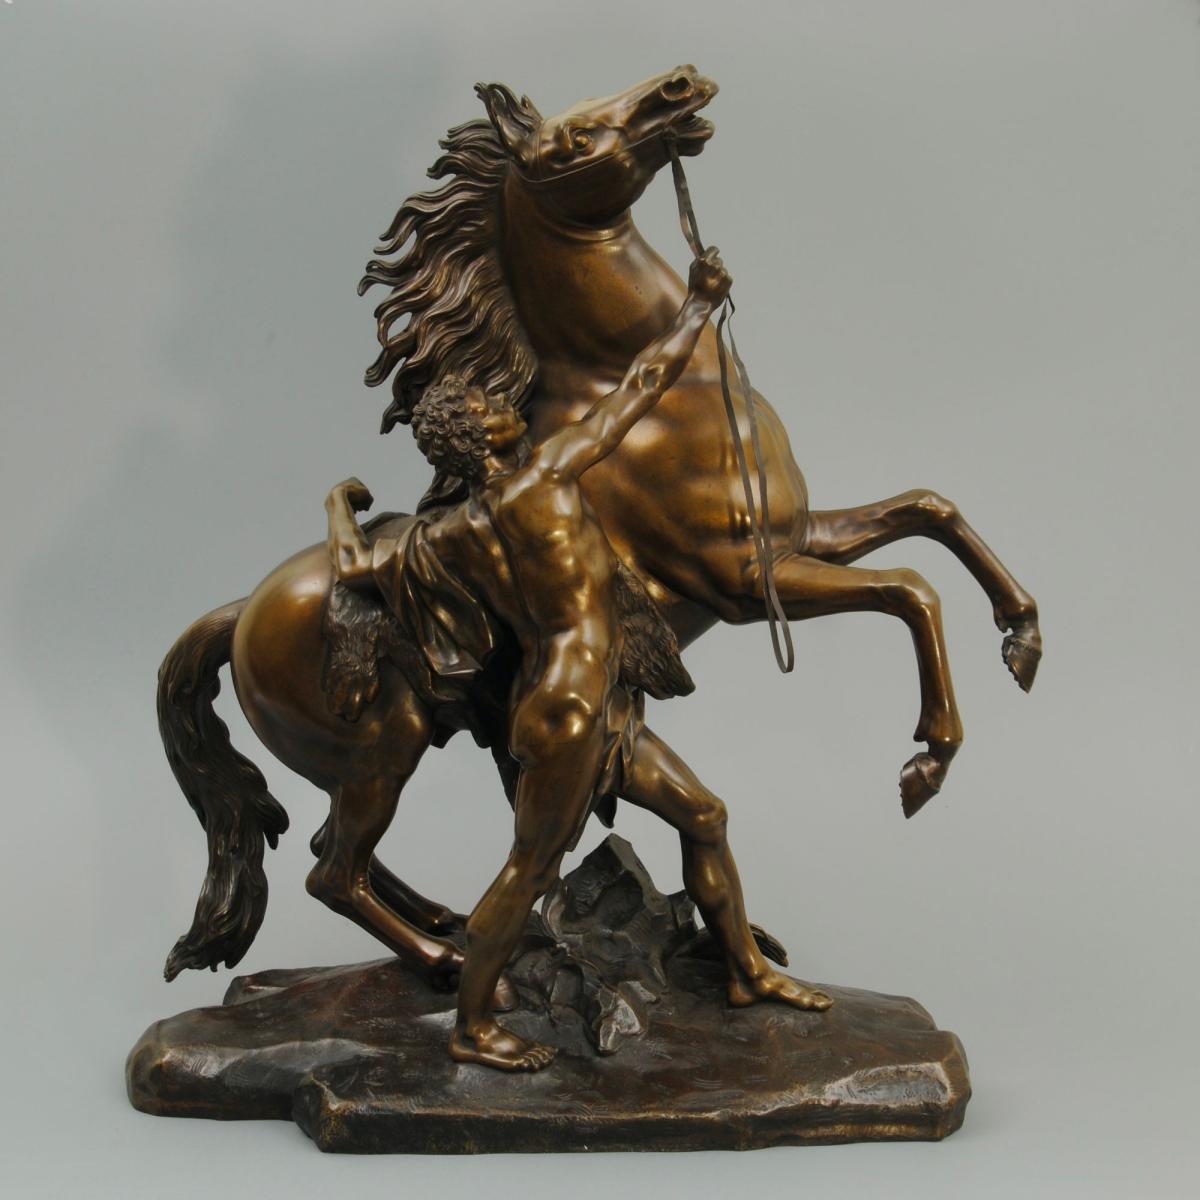 A Fine Pair of Mid 19th Century Marley Horses